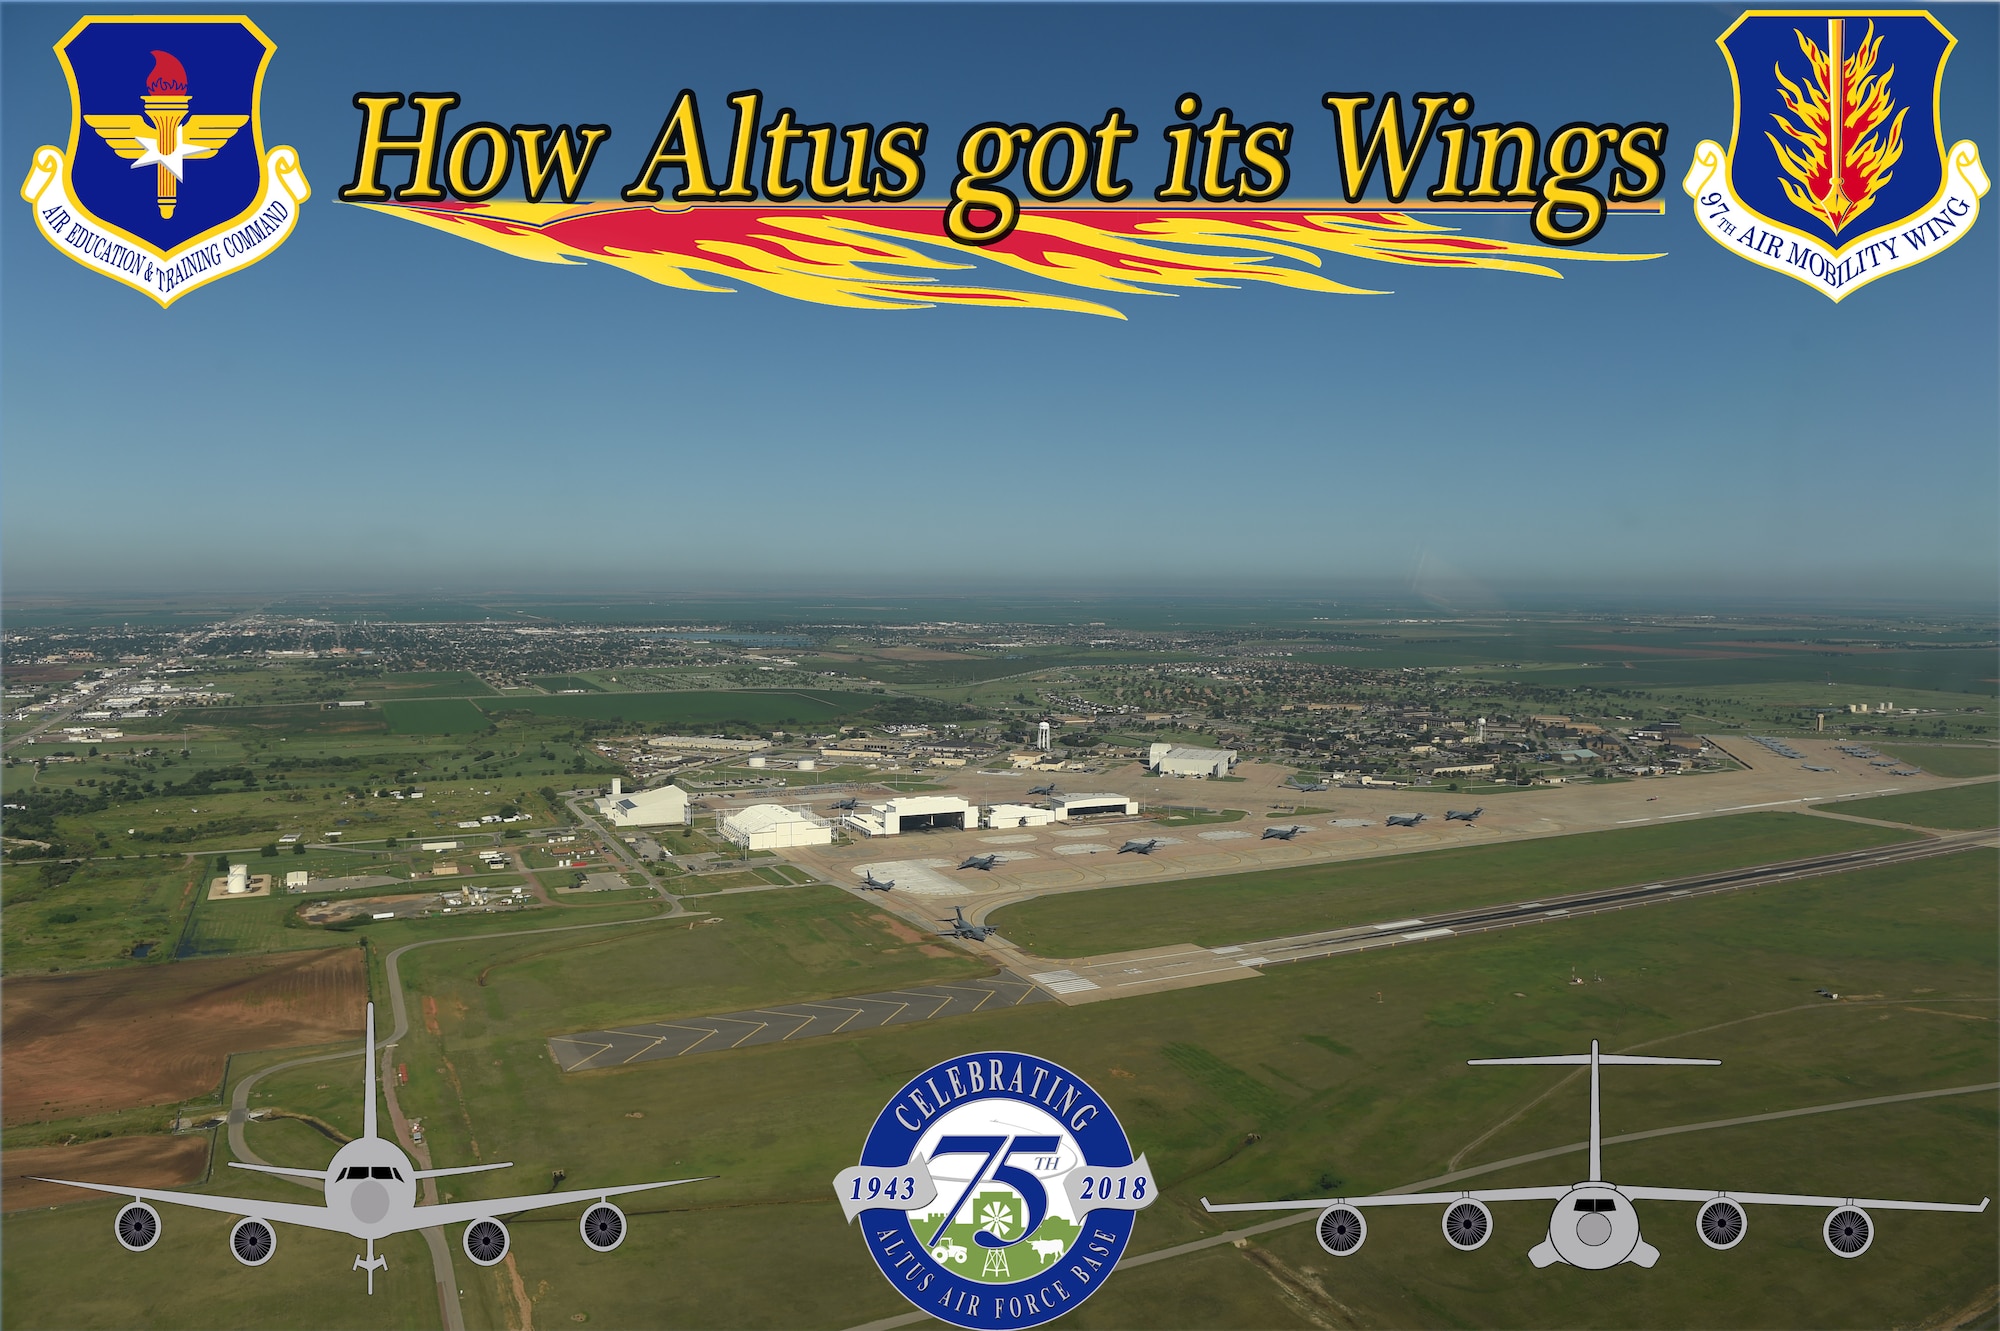 (U.S. Air Force graphic by Senior Airman Cody Dowell)